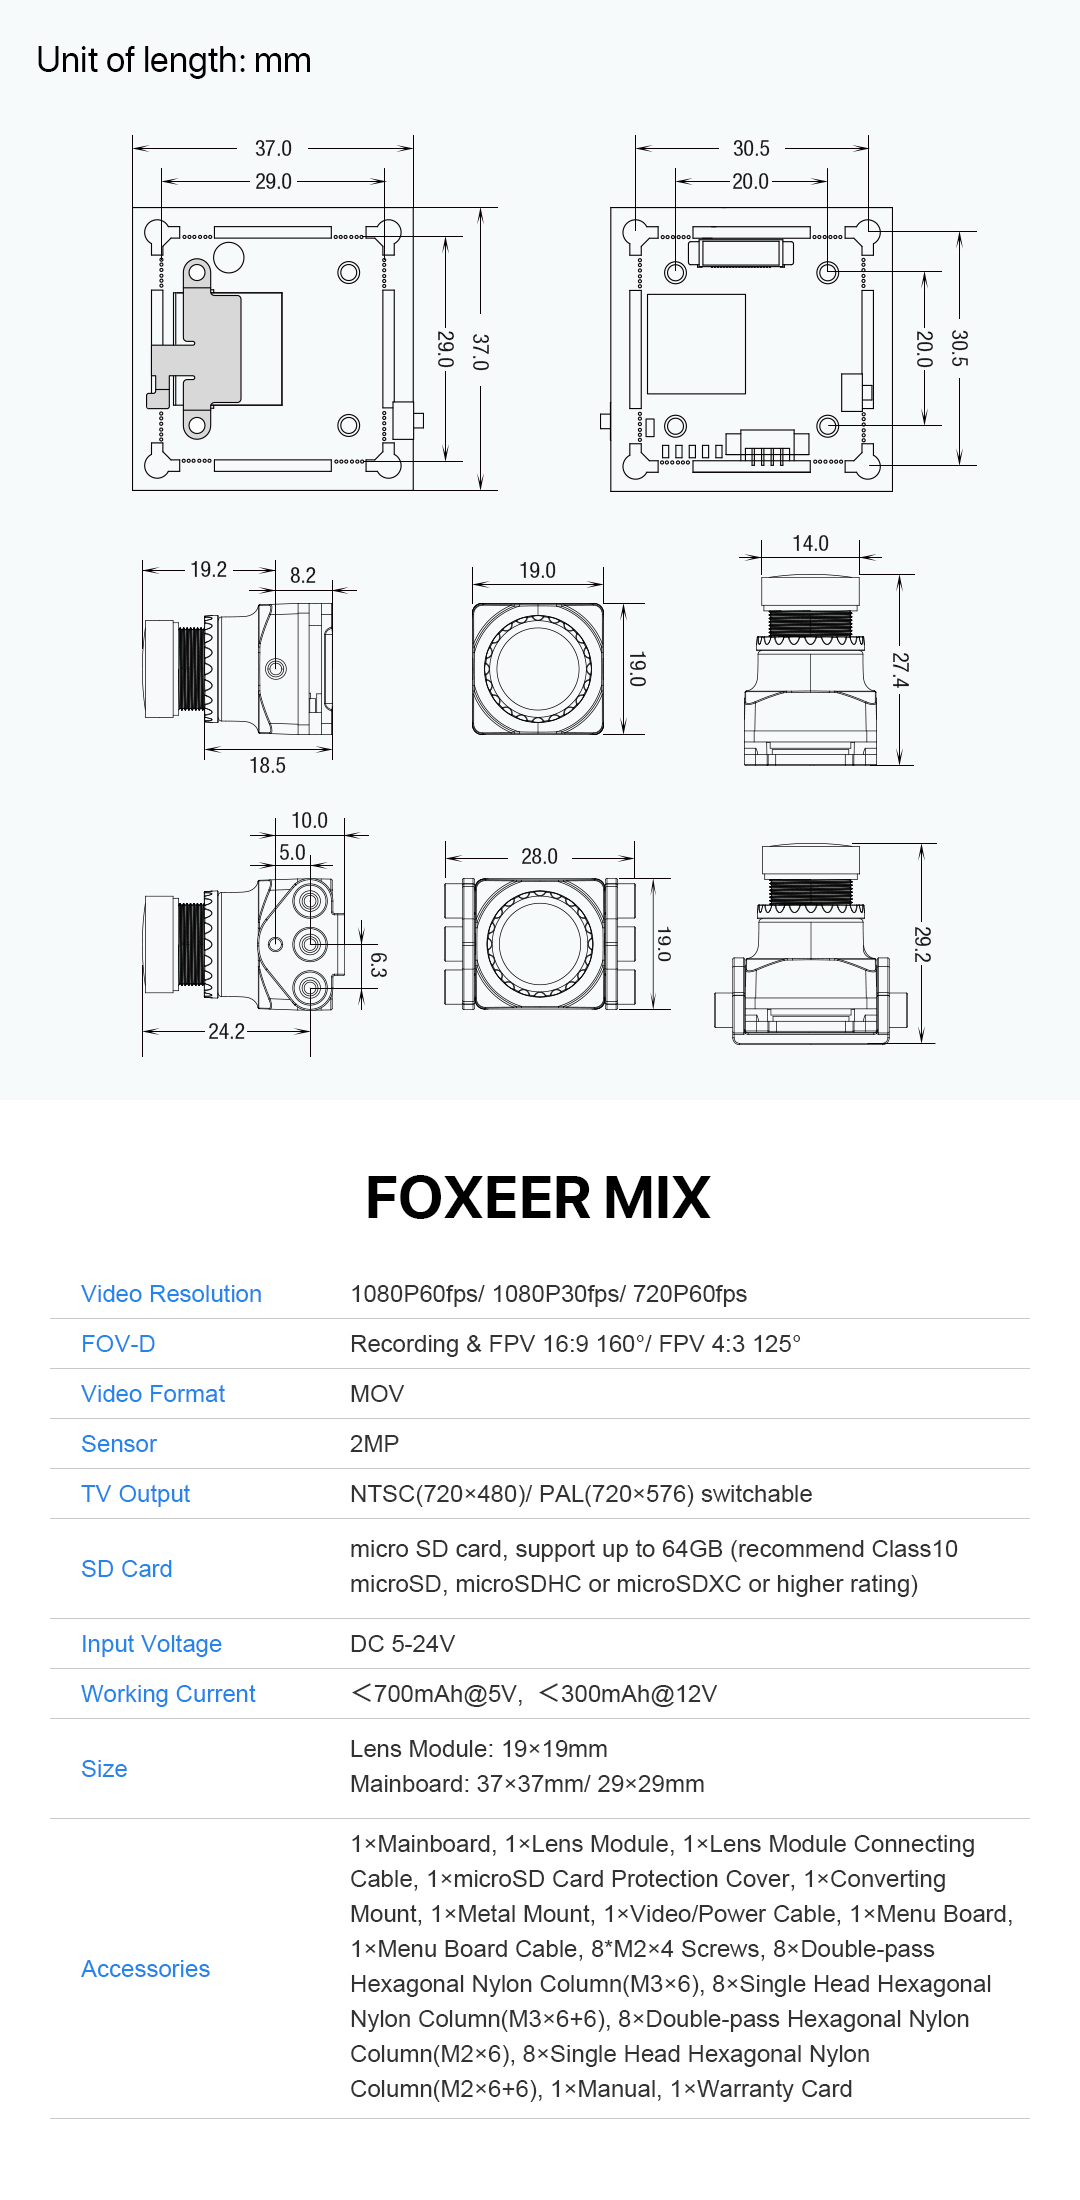 Foxeer Mix 2 1080p 60fps Super WDR Mini HD FPV Camera (Pick Your Color) 15 - Foxeer